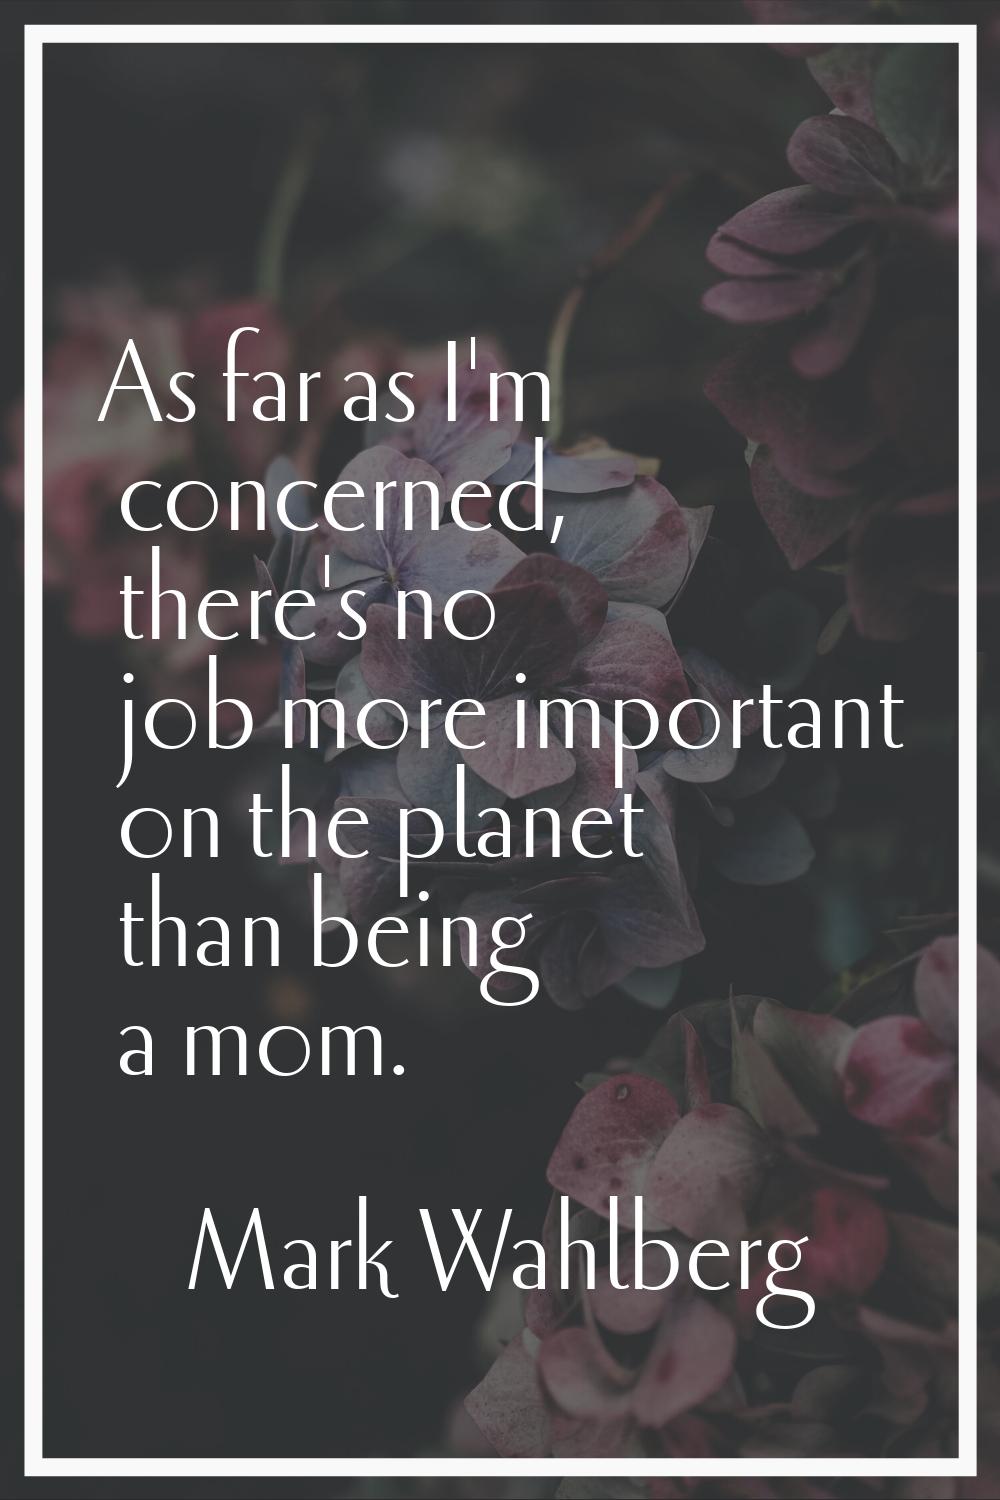 As far as I'm concerned, there's no job more important on the planet than being a mom.